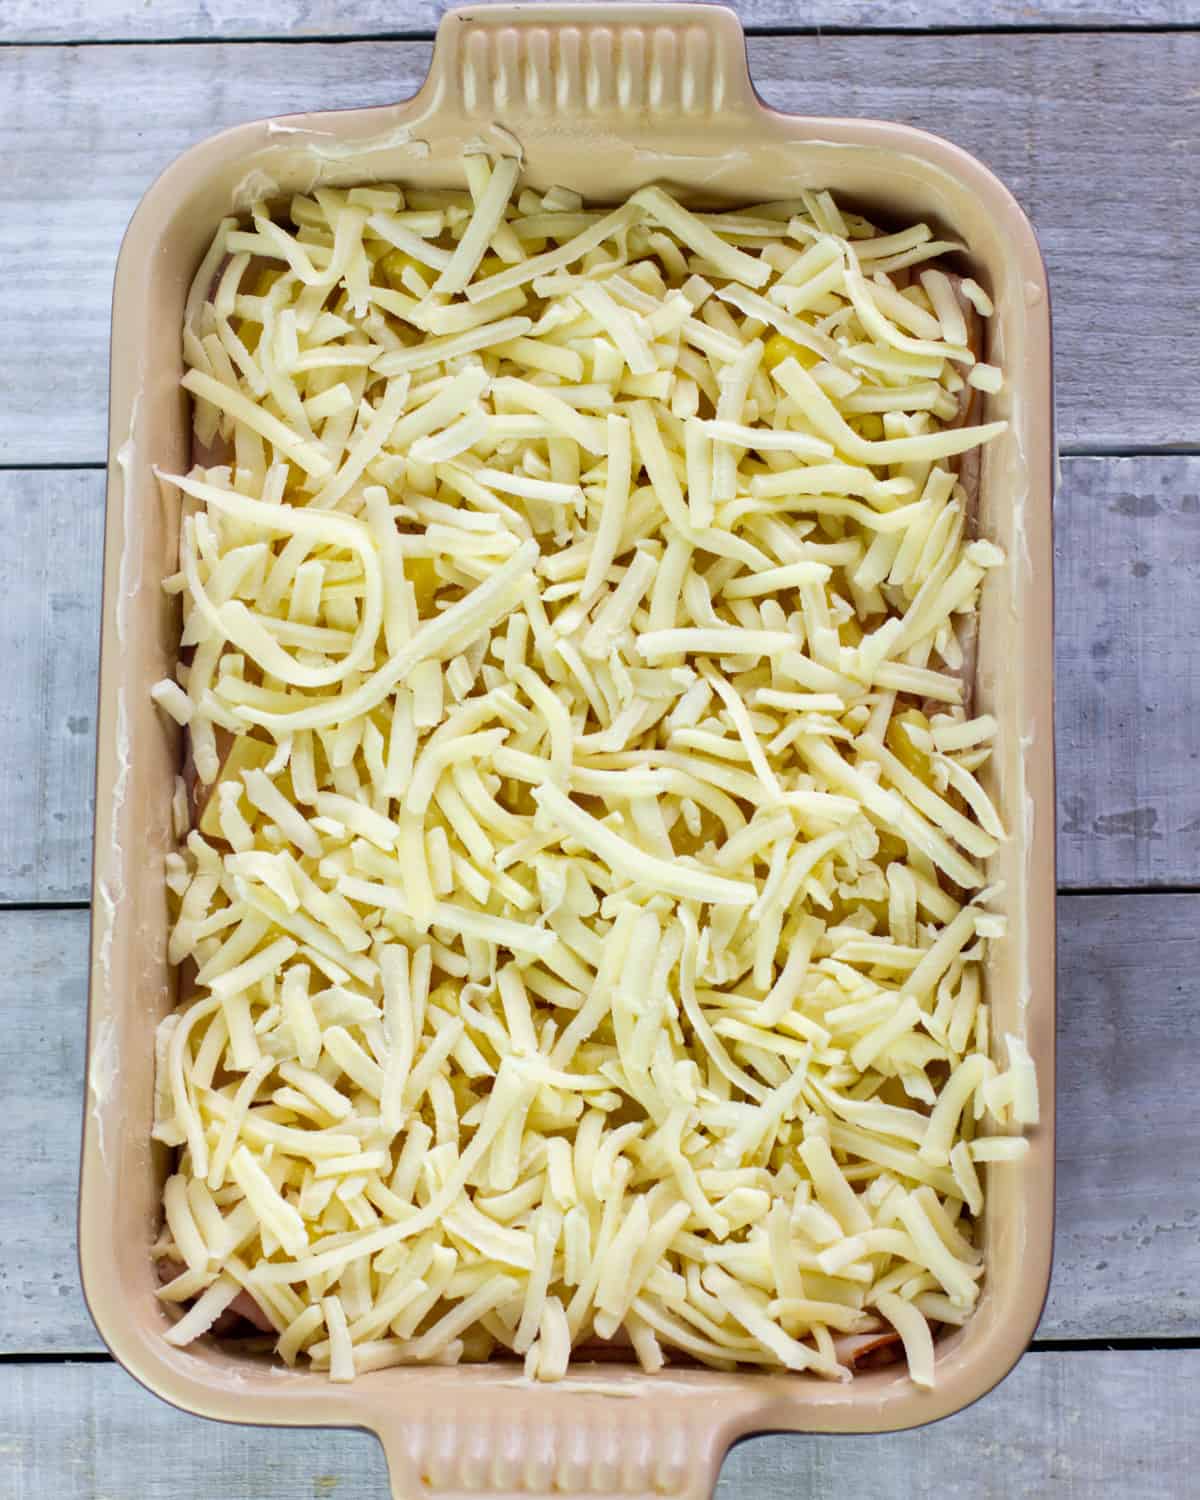 Grated mozzarella cheese spread all over ingredients in a baking dish.